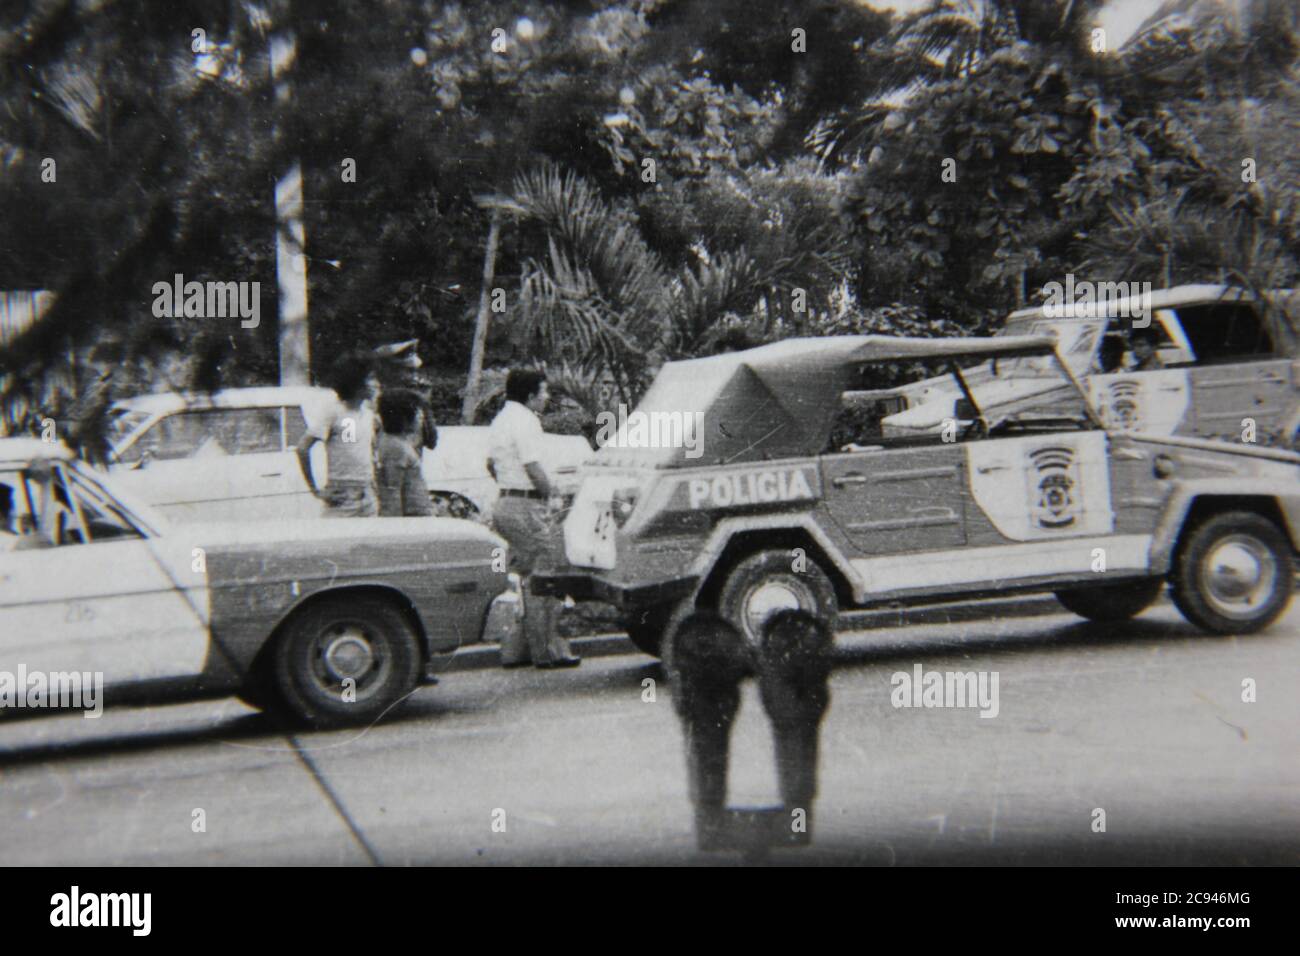 Fine 70s vintage black and white street photography of a policia car and people watching an incident in Mexico. Stock Photo